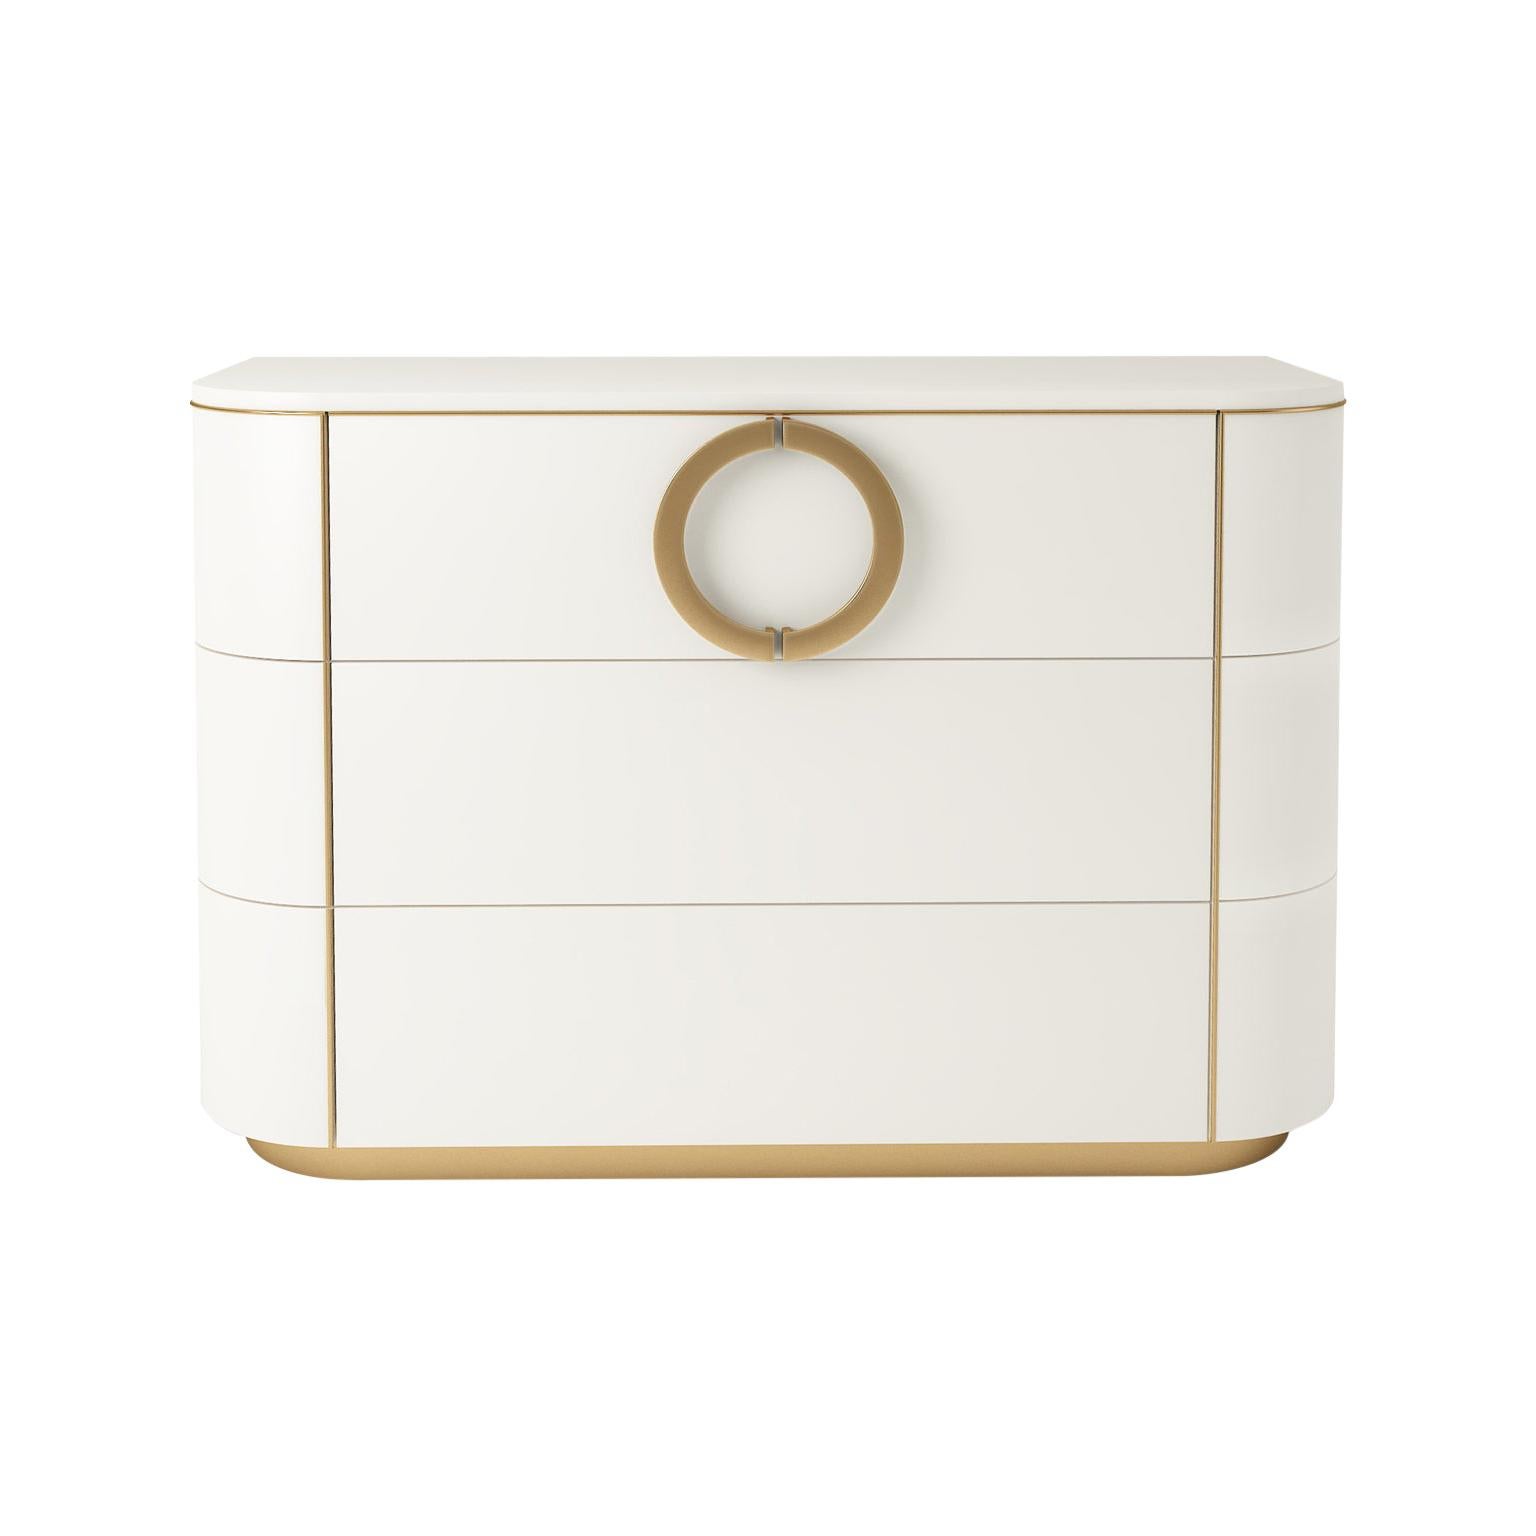 Isabella Costantini, Italy, Maddalena Dresser with Three Drawers For Sale